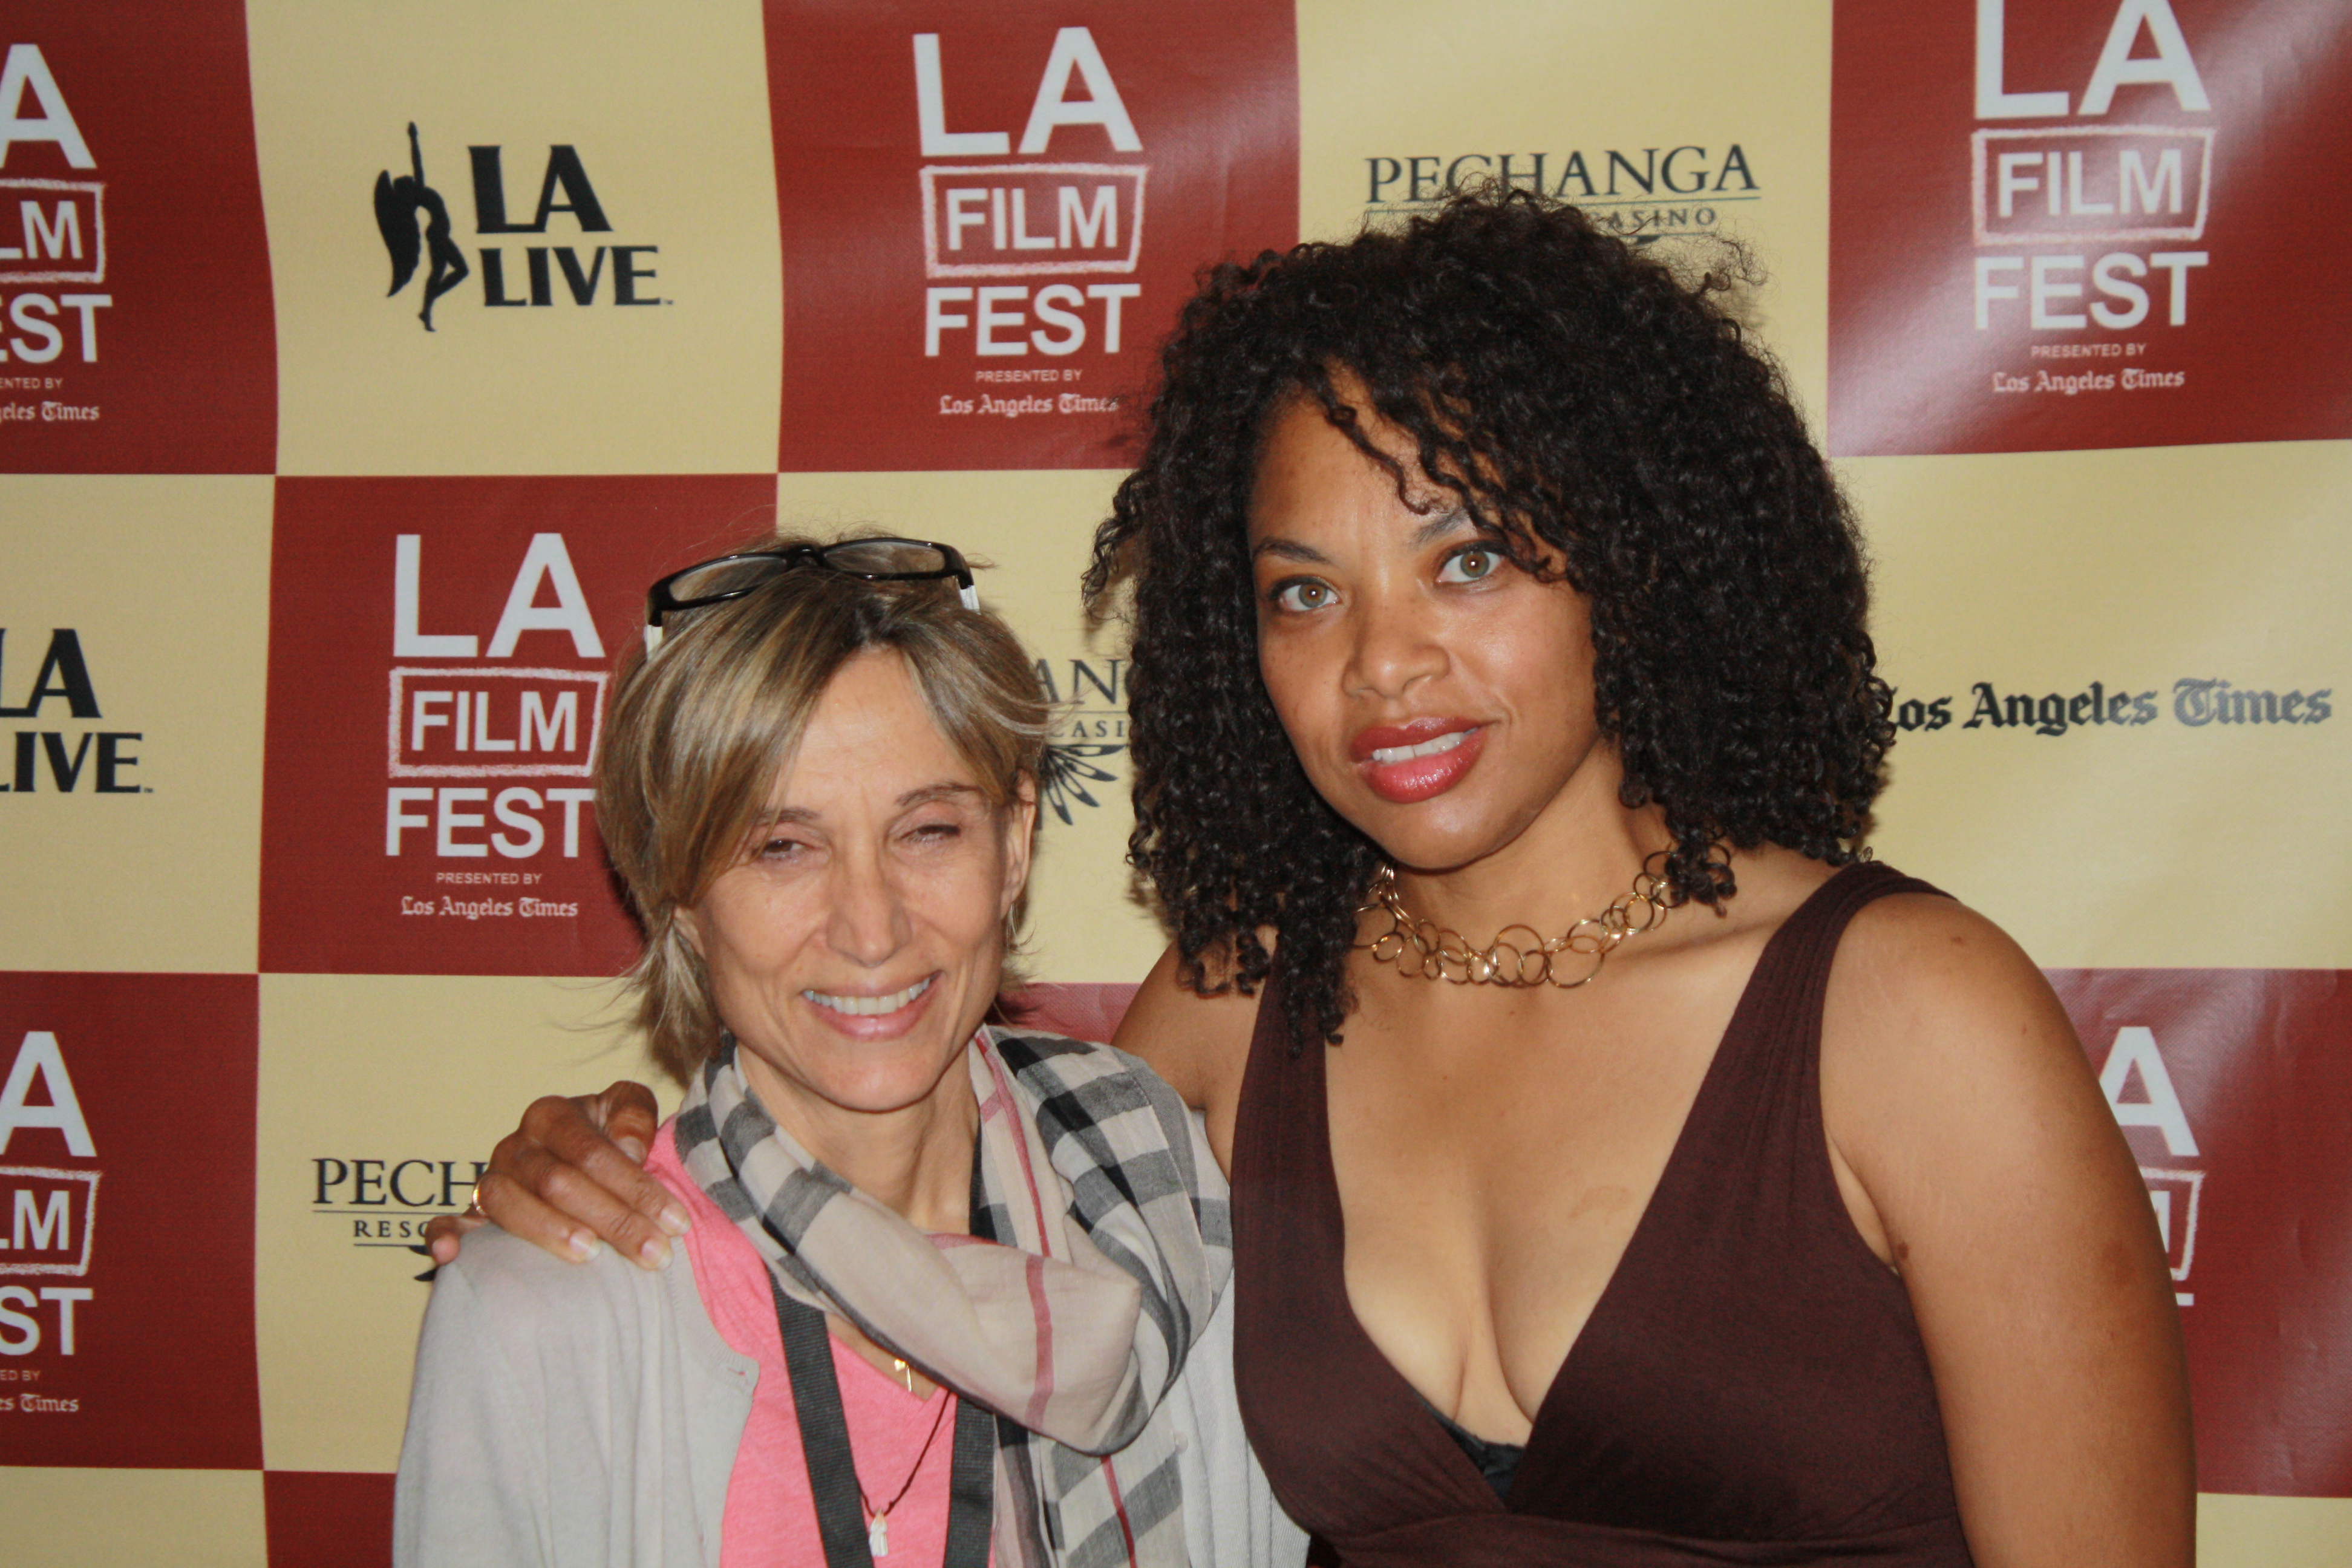 Los Angeles Film Festival 2011: Diana C. Zollicoffer and Fina Torres